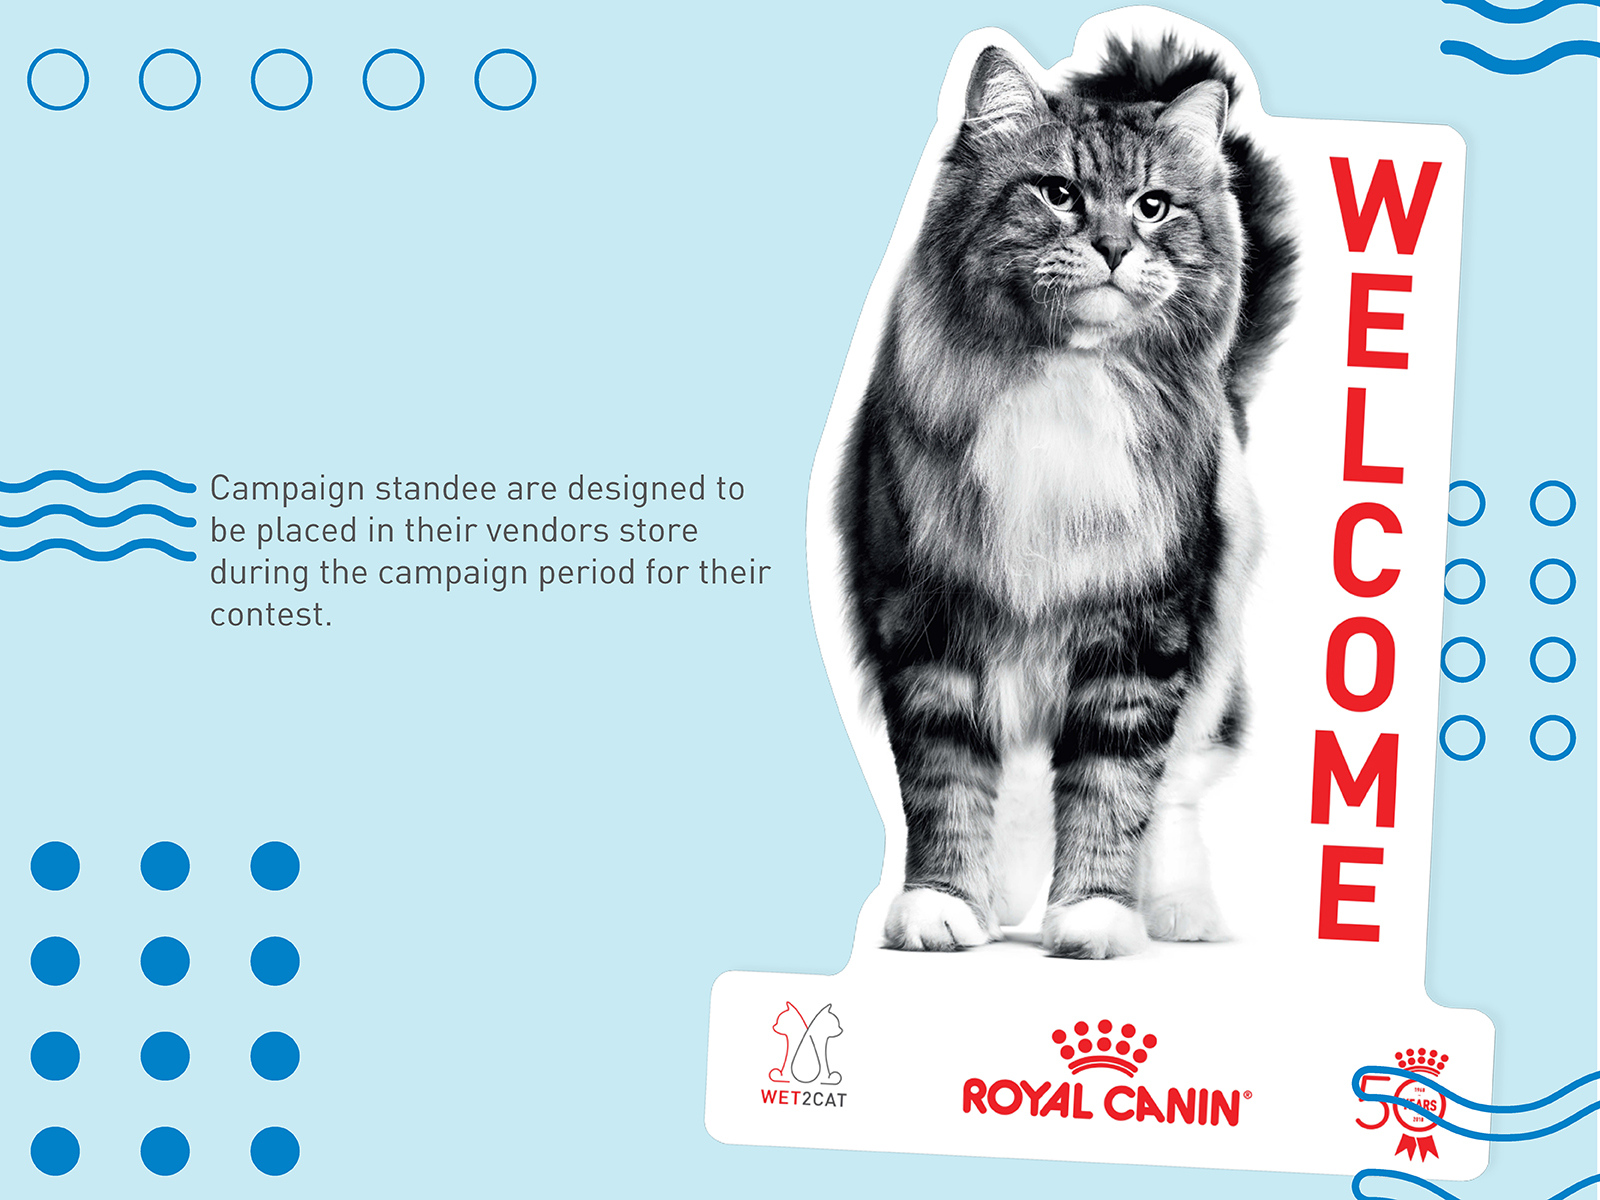 Royal Canin Wet2Cat campaign human-sized prop design